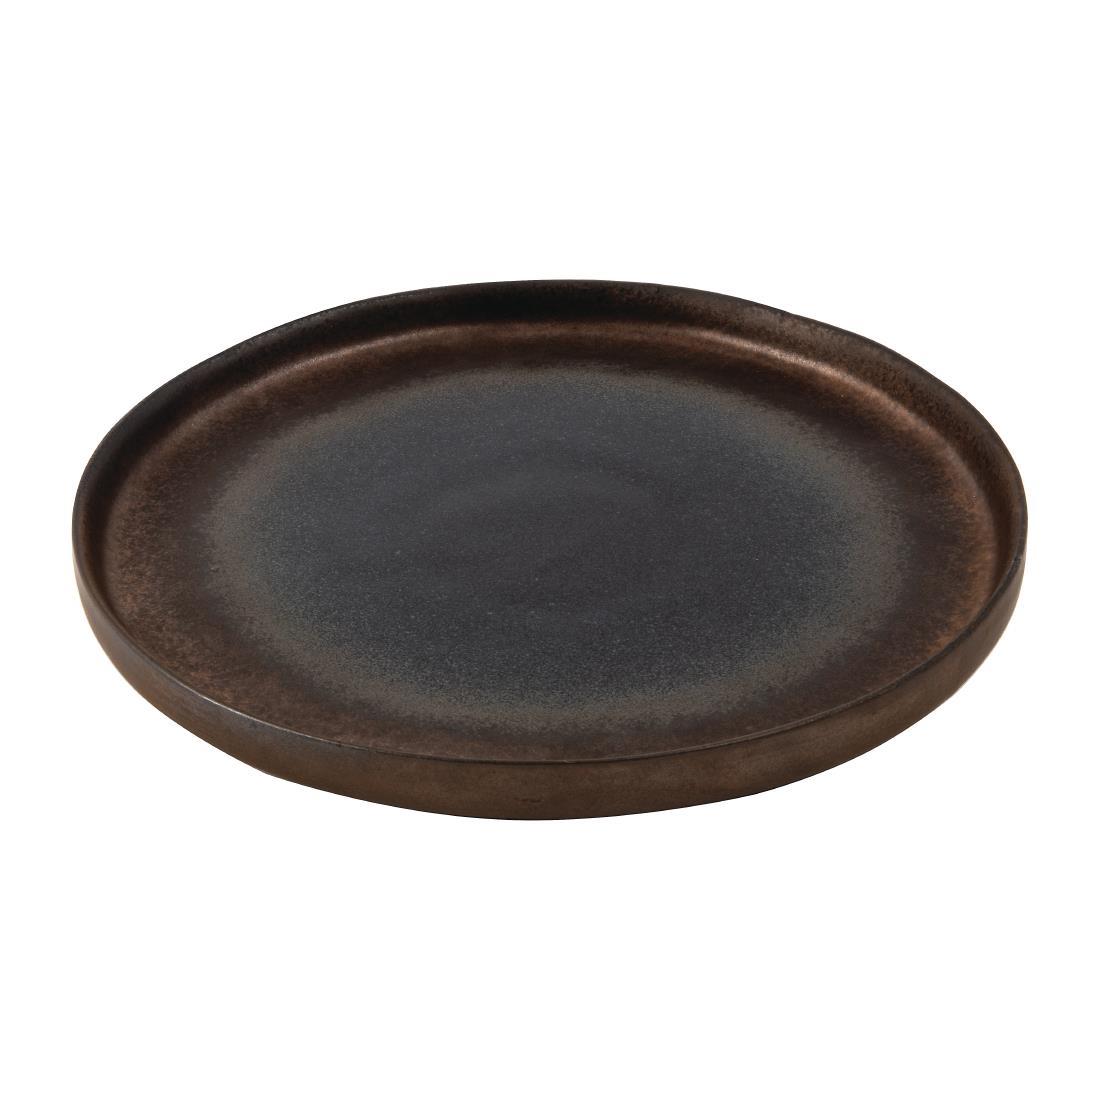 Olympia Ochre Flat Plates 220mm (Pack of 6) - FC286  - 2